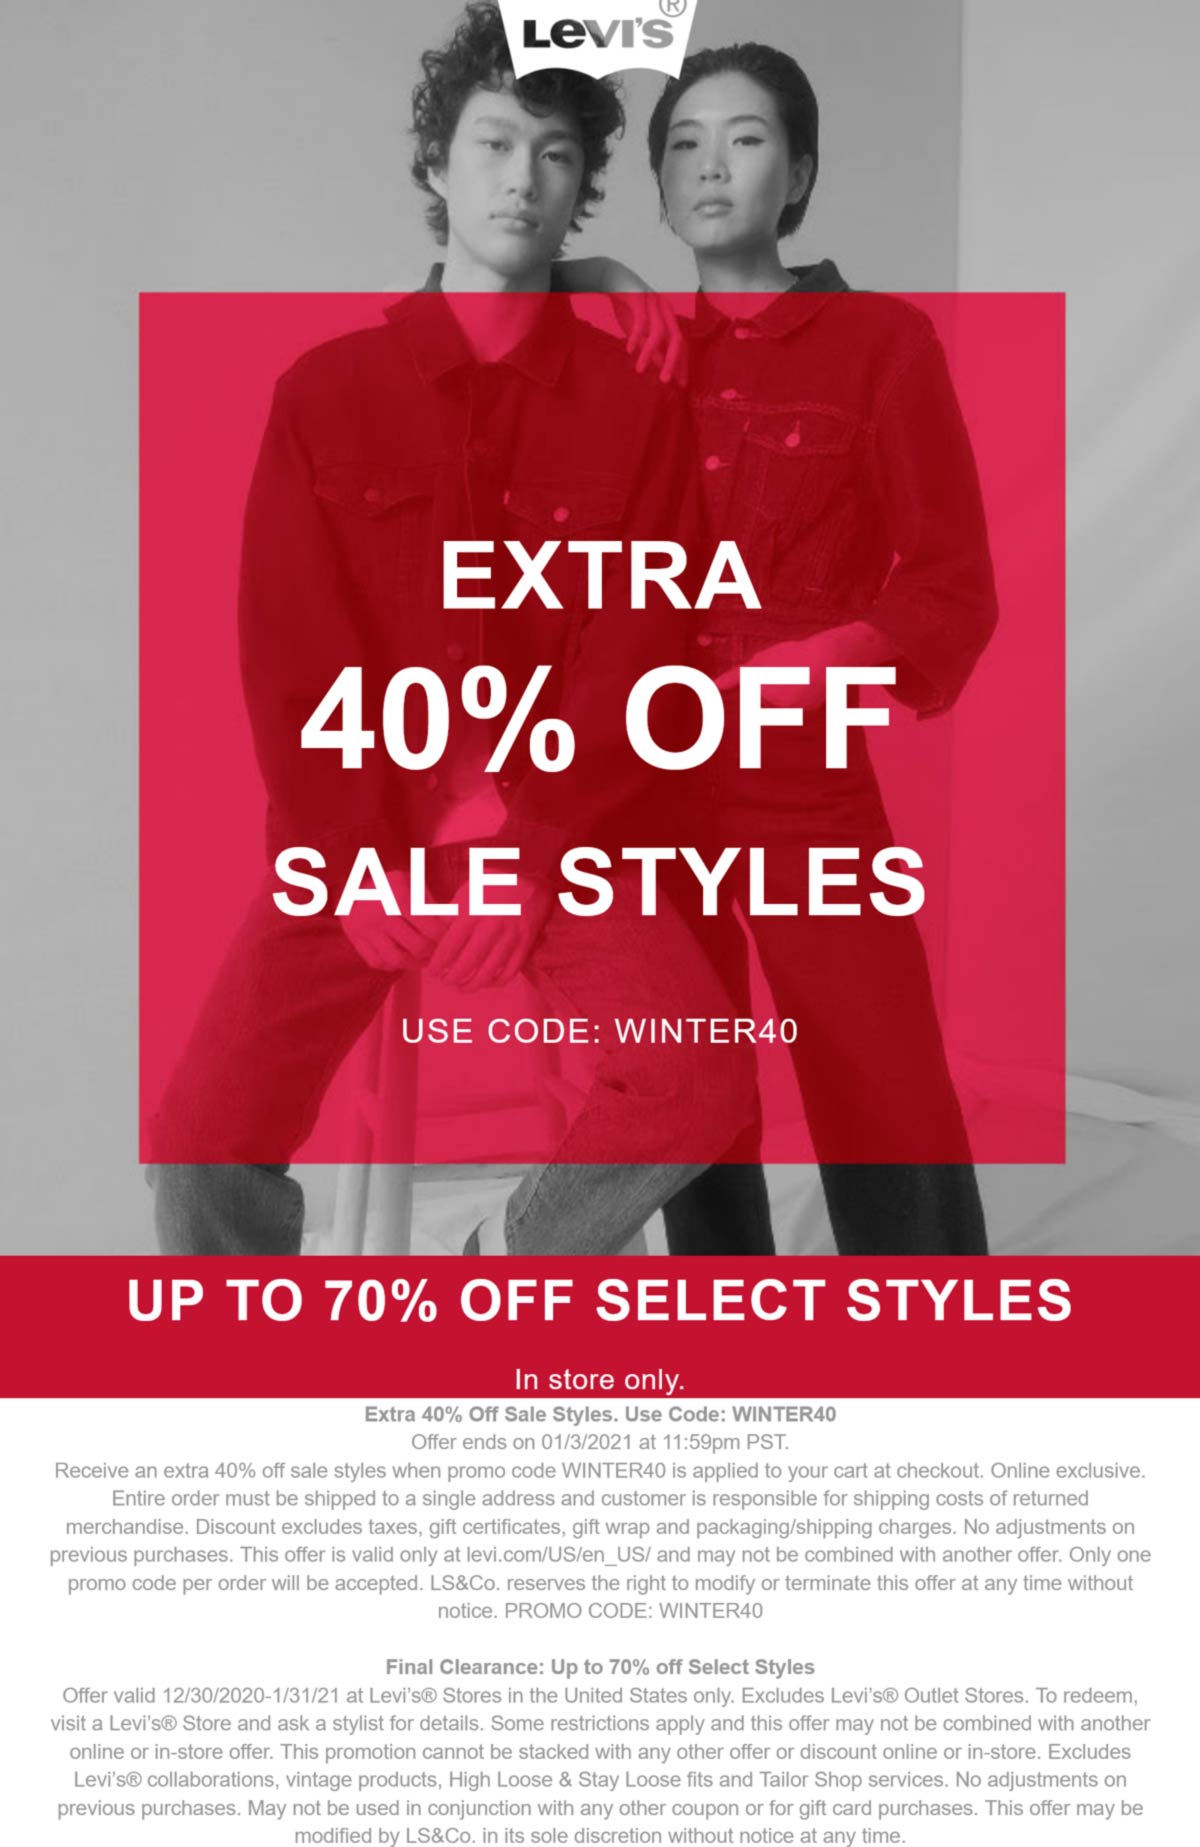 Levis stores Coupon  Extra 40% off sale styles at Levis via promo code WINTER40 #levis 